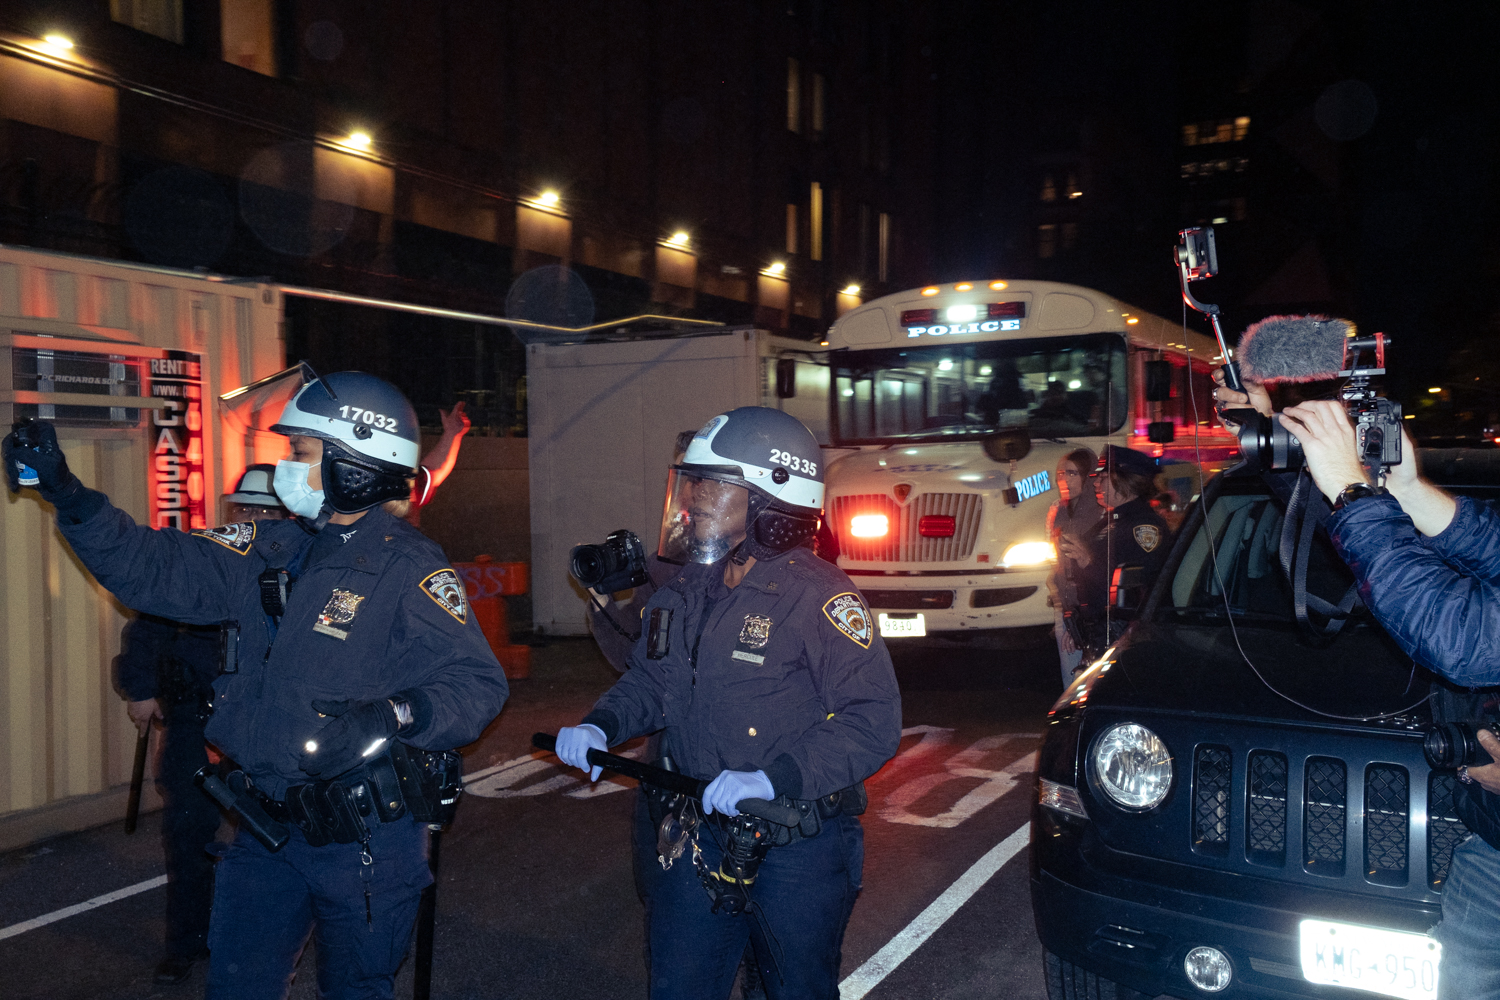 Two N.Y.P.D. officers walk in front of a correctional bus holding pepper spray and batons.